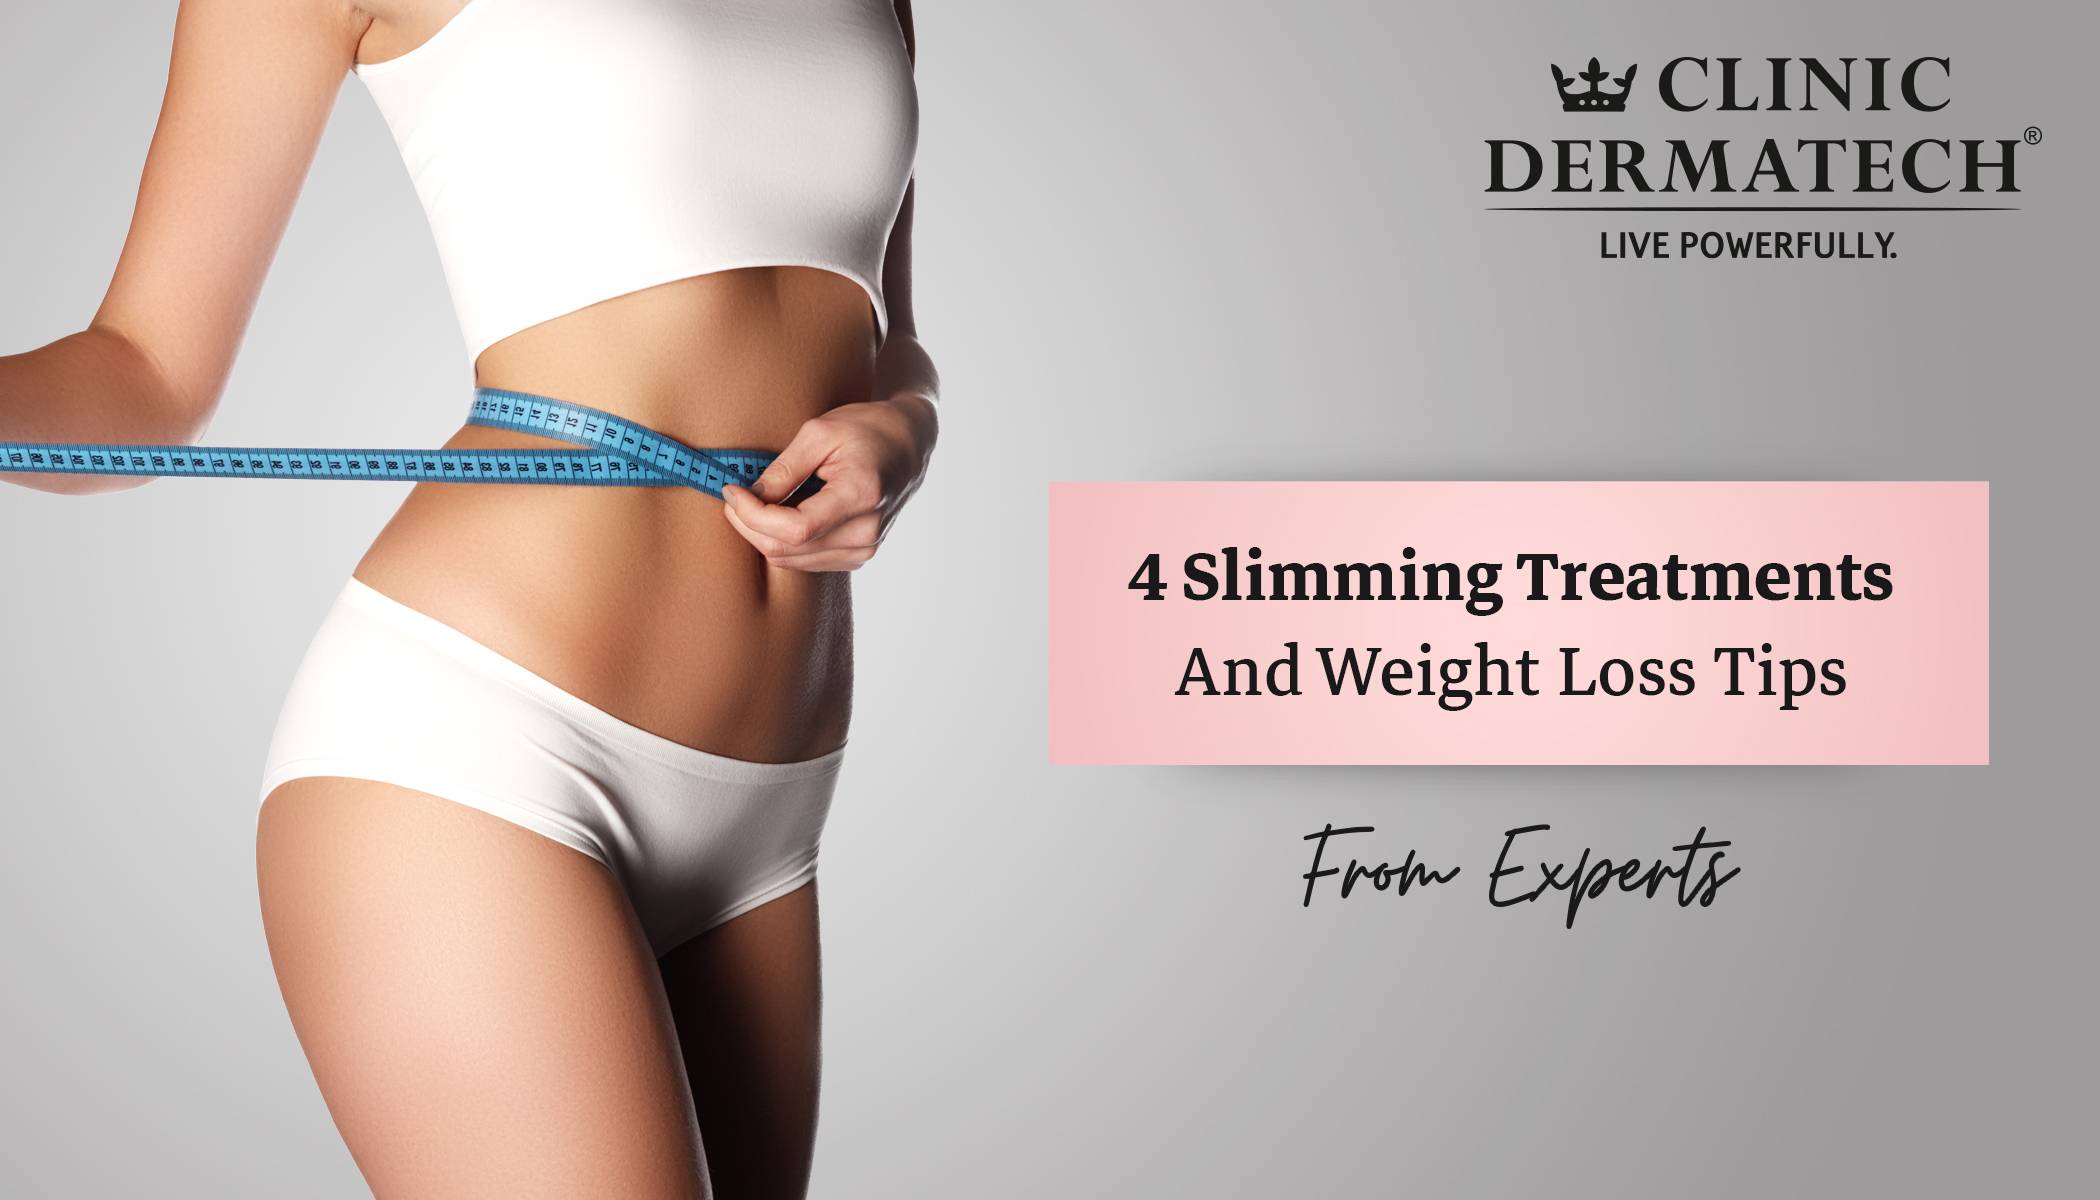 How Soon After Weight Loss Should I Get Body Sculpting Treatment?